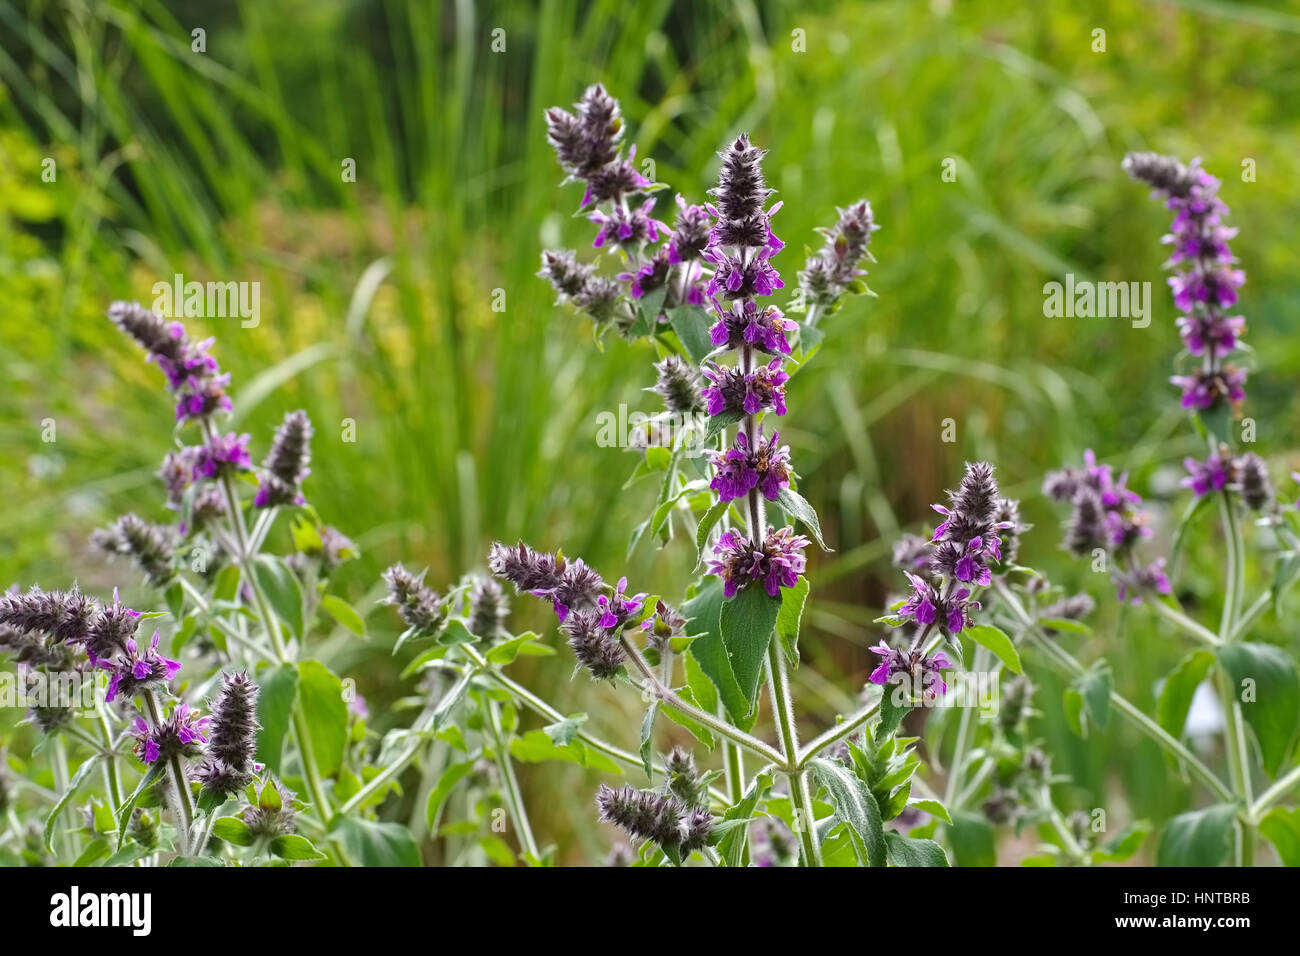 Stachys persica, ein Ziest - Stachys persica, a plant from lambs ears Stock Photo